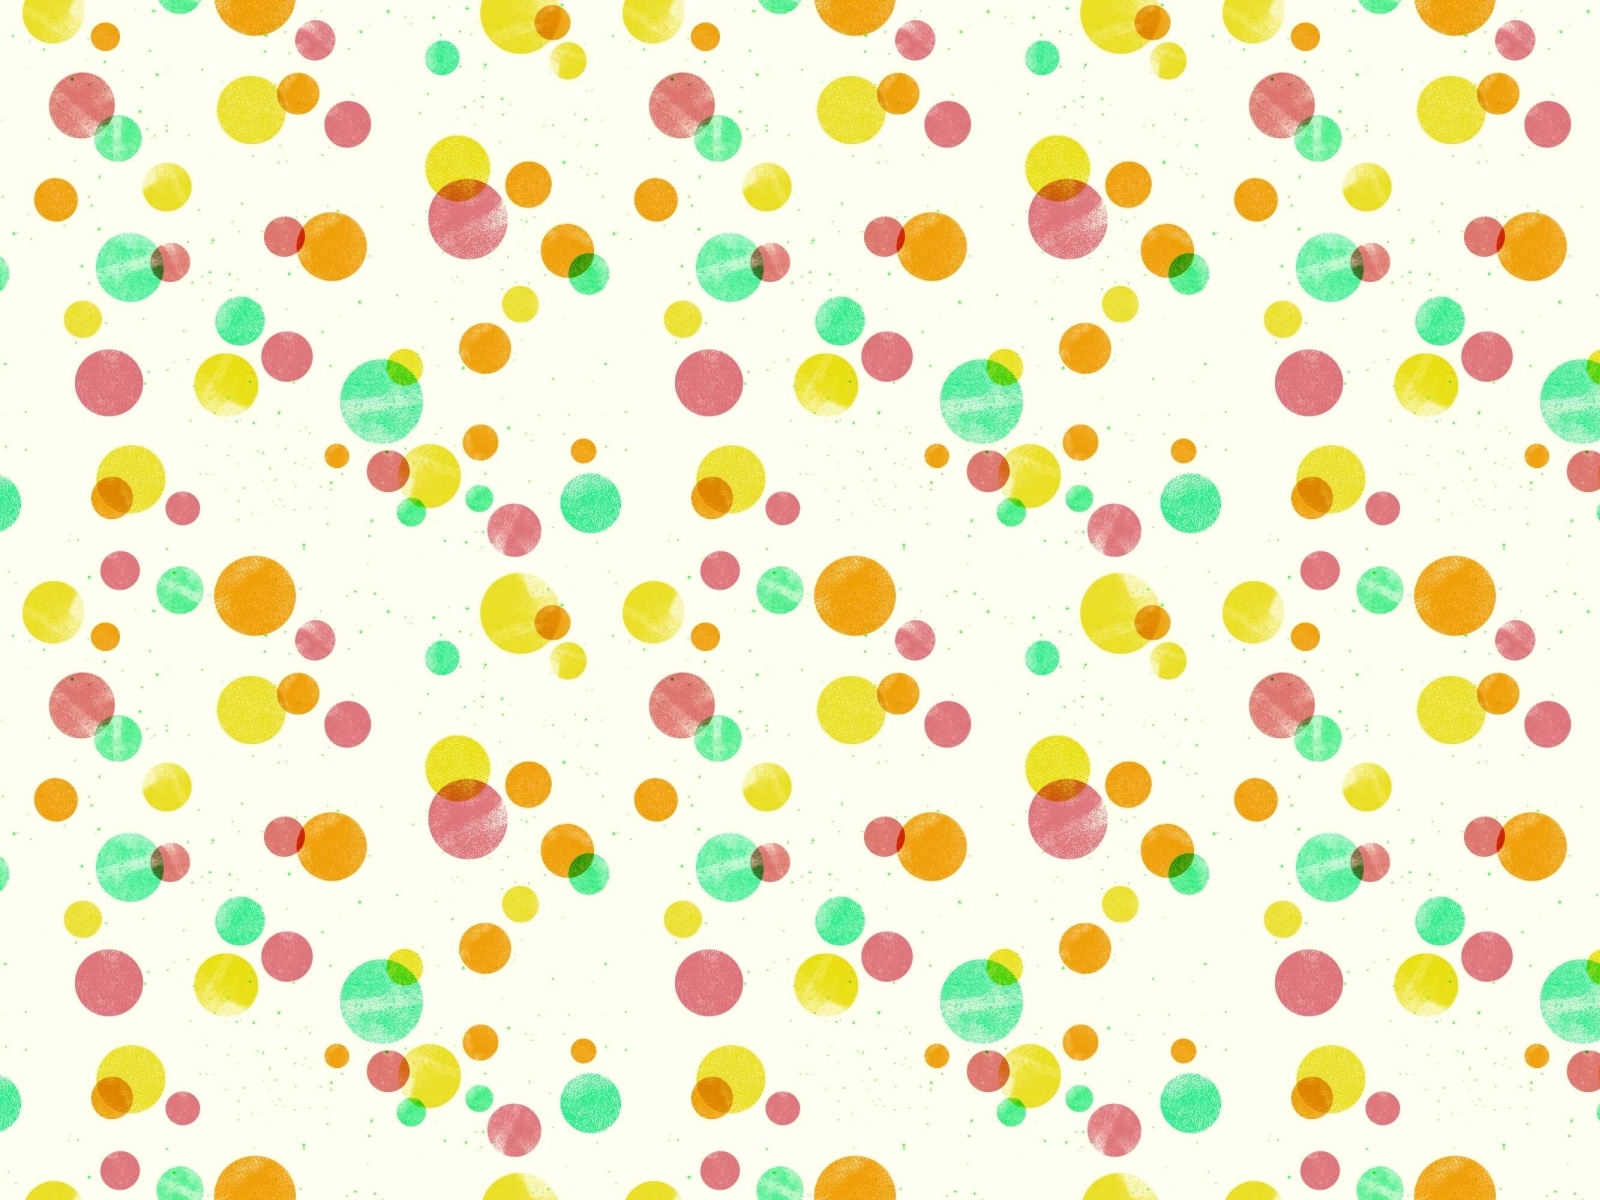 Bubbles- Seamless pattern by Nora on Dribbble